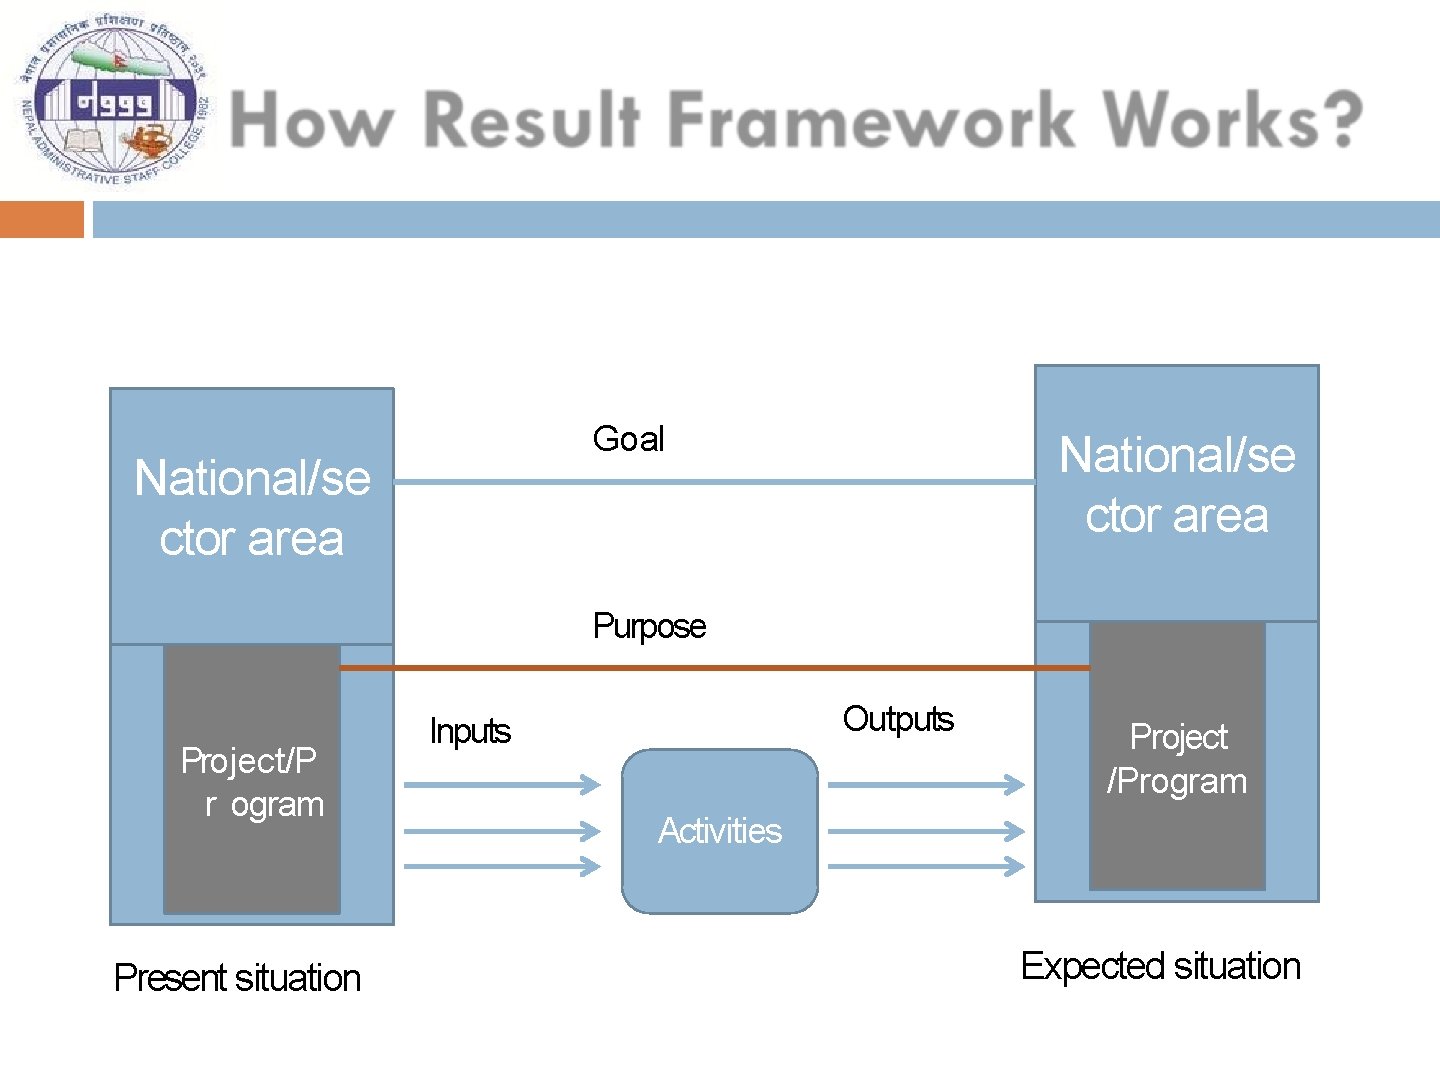 Goal National/se ctor area Purpose Project/P r ogram Present situation Outputs Inputs Project /Program